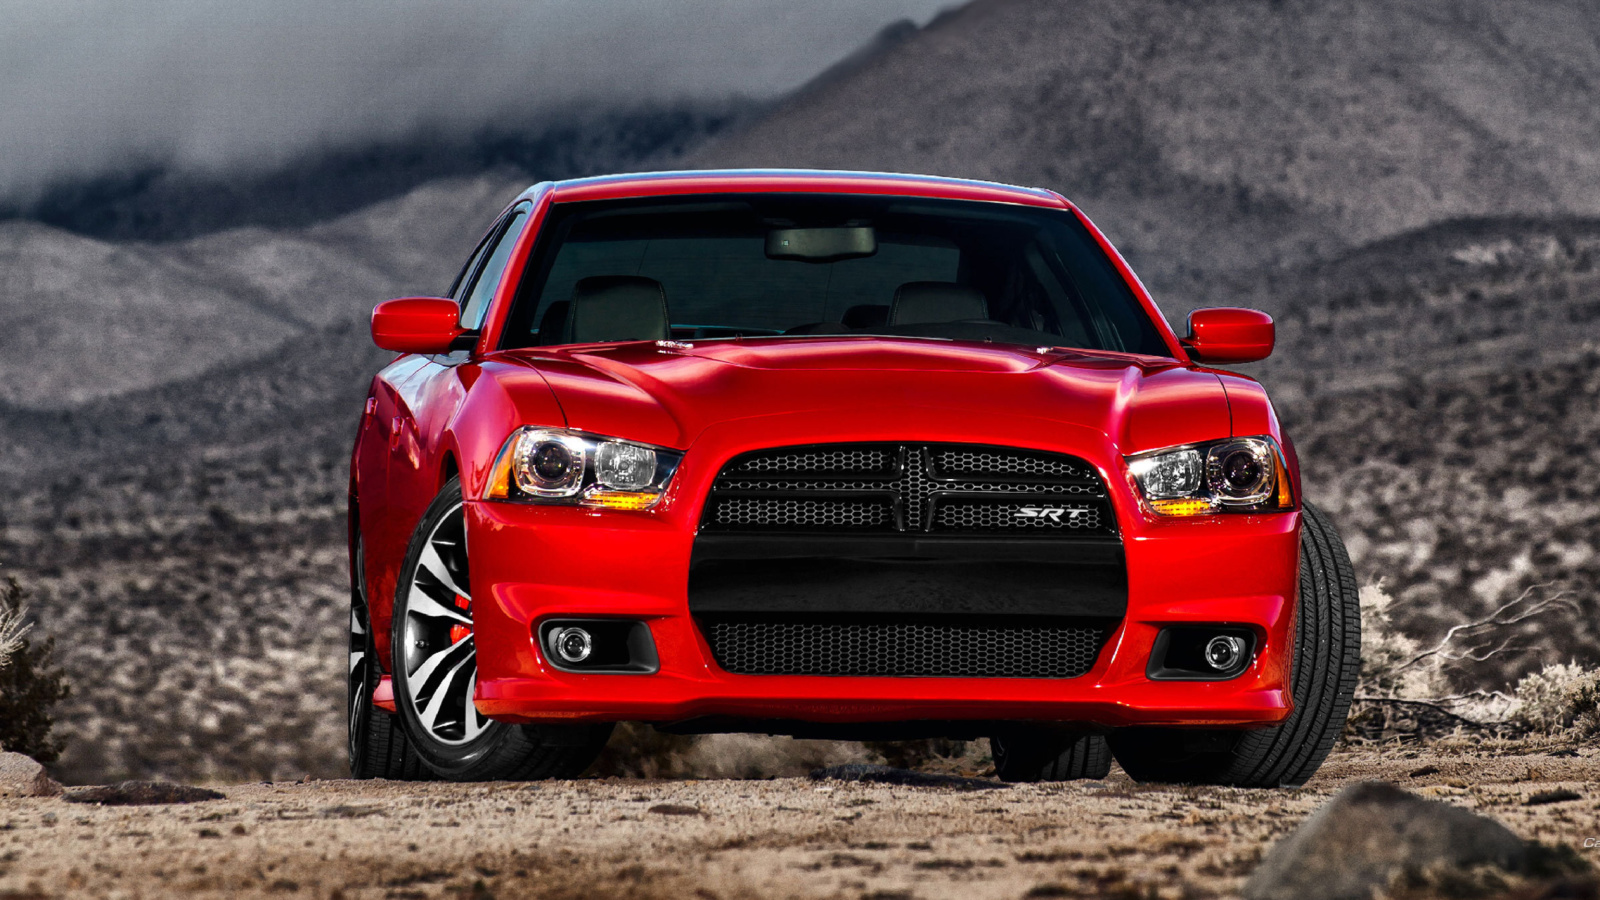 2015 Dodge Charger wallpaper 1600x900